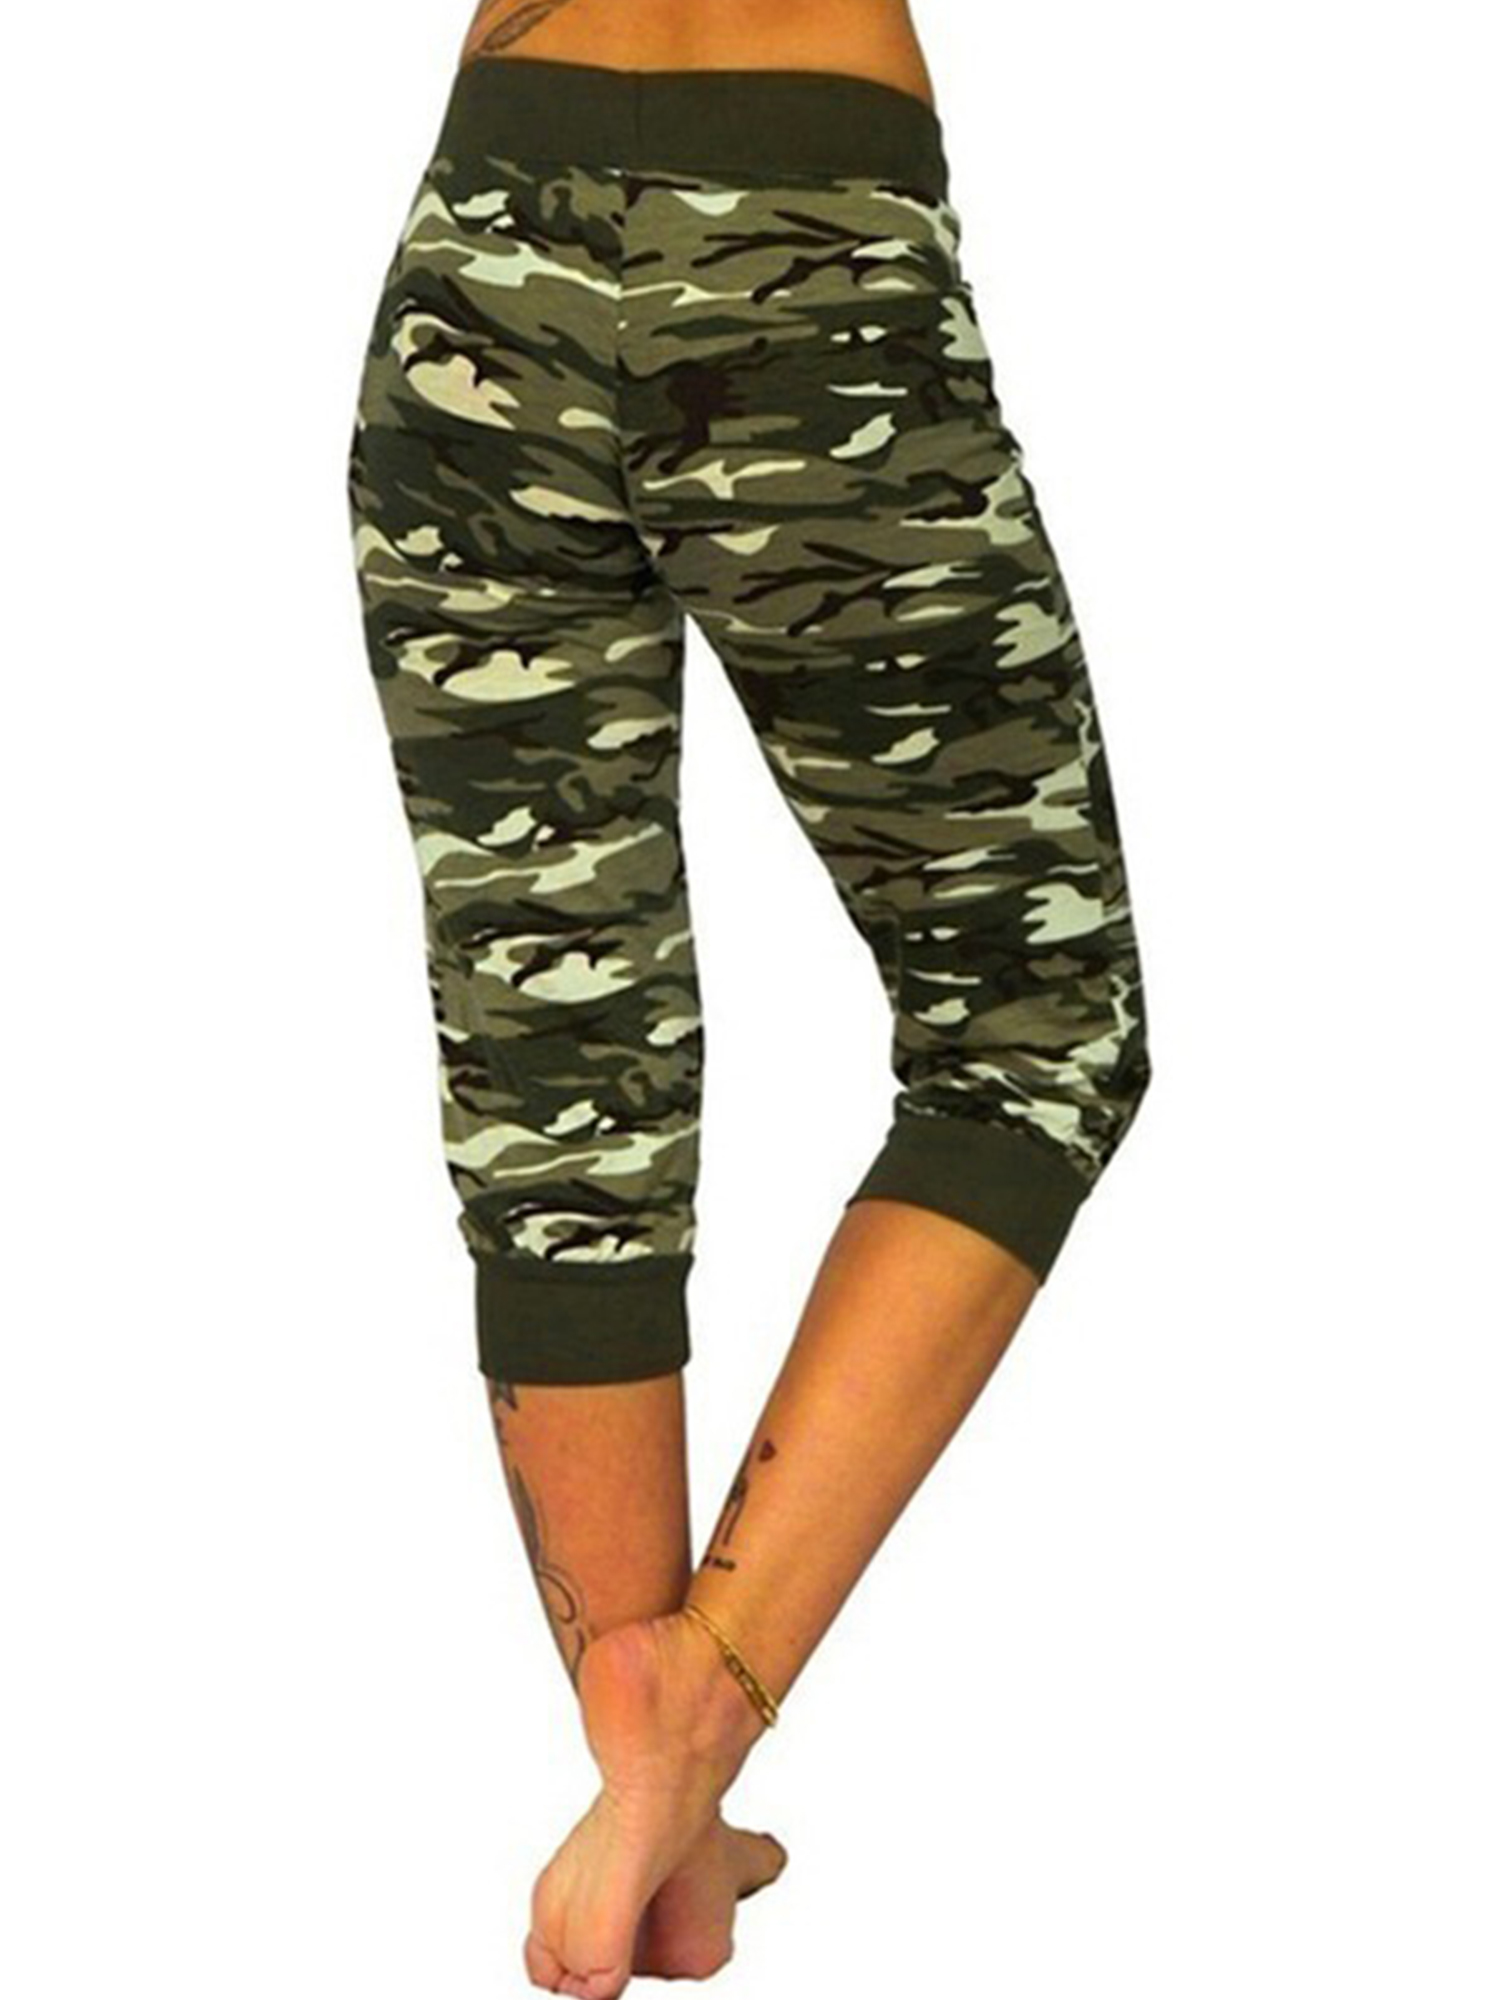 (2 Packs) Juniors' Plus Size Camo Sports Yoga Crop Jeggings High Waist Tummy Control Oversized Camouflage Pants - image 5 of 5